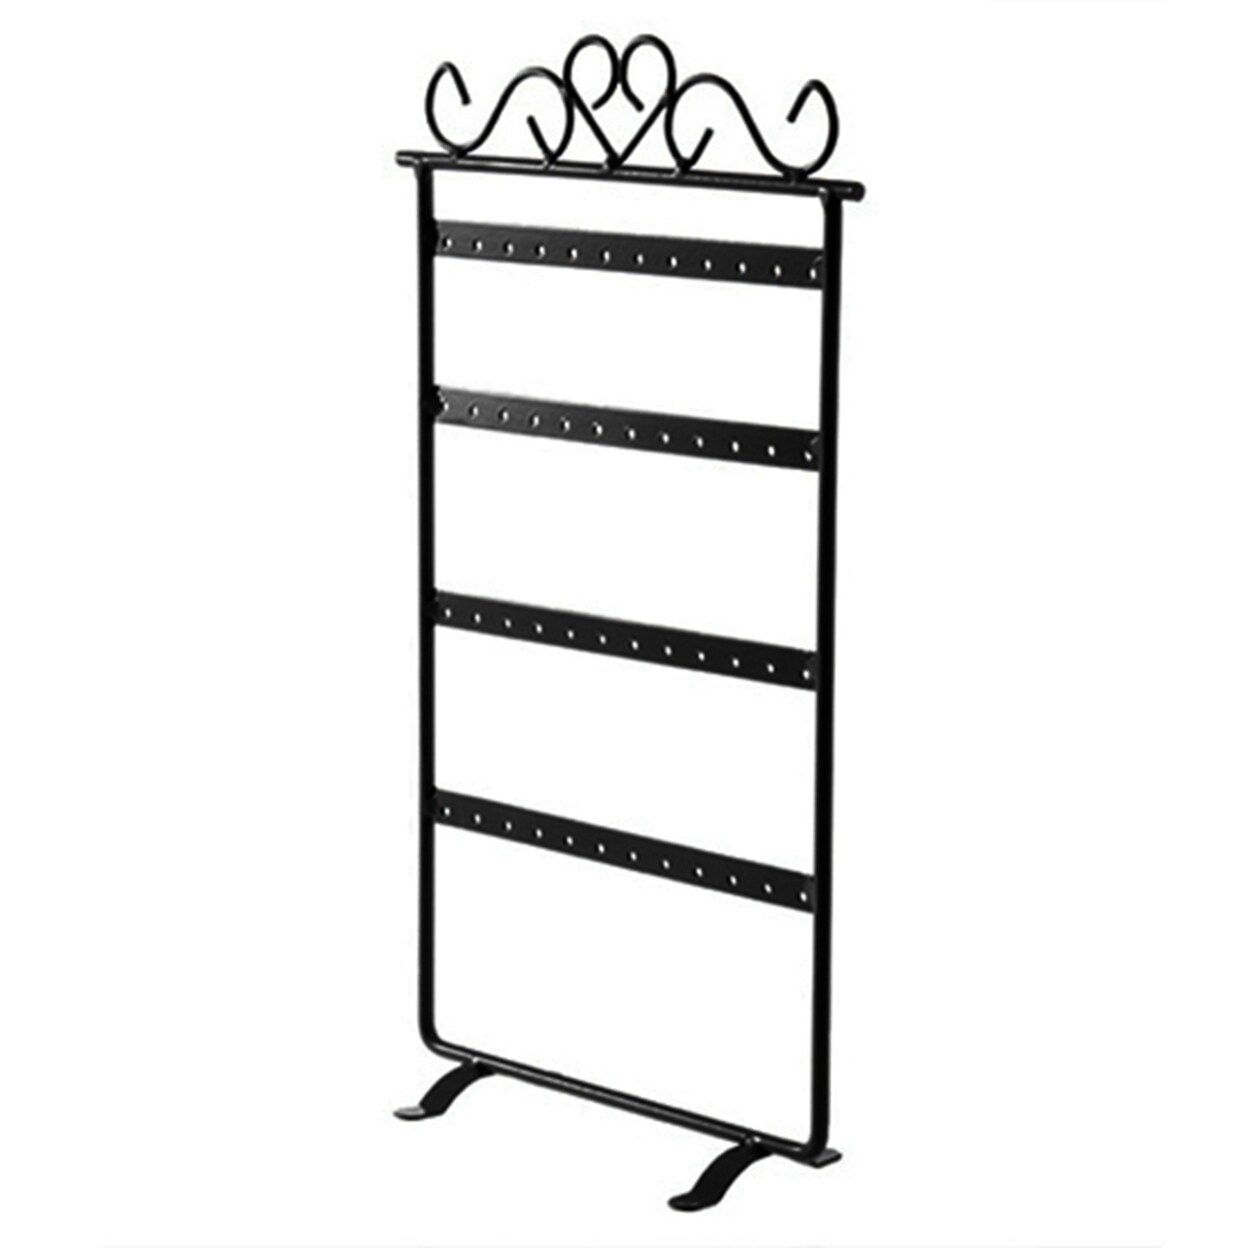 Generic Earrings Hanging Rack Sturdy Stable Metal Delicate Jewelry Display Stand for Home